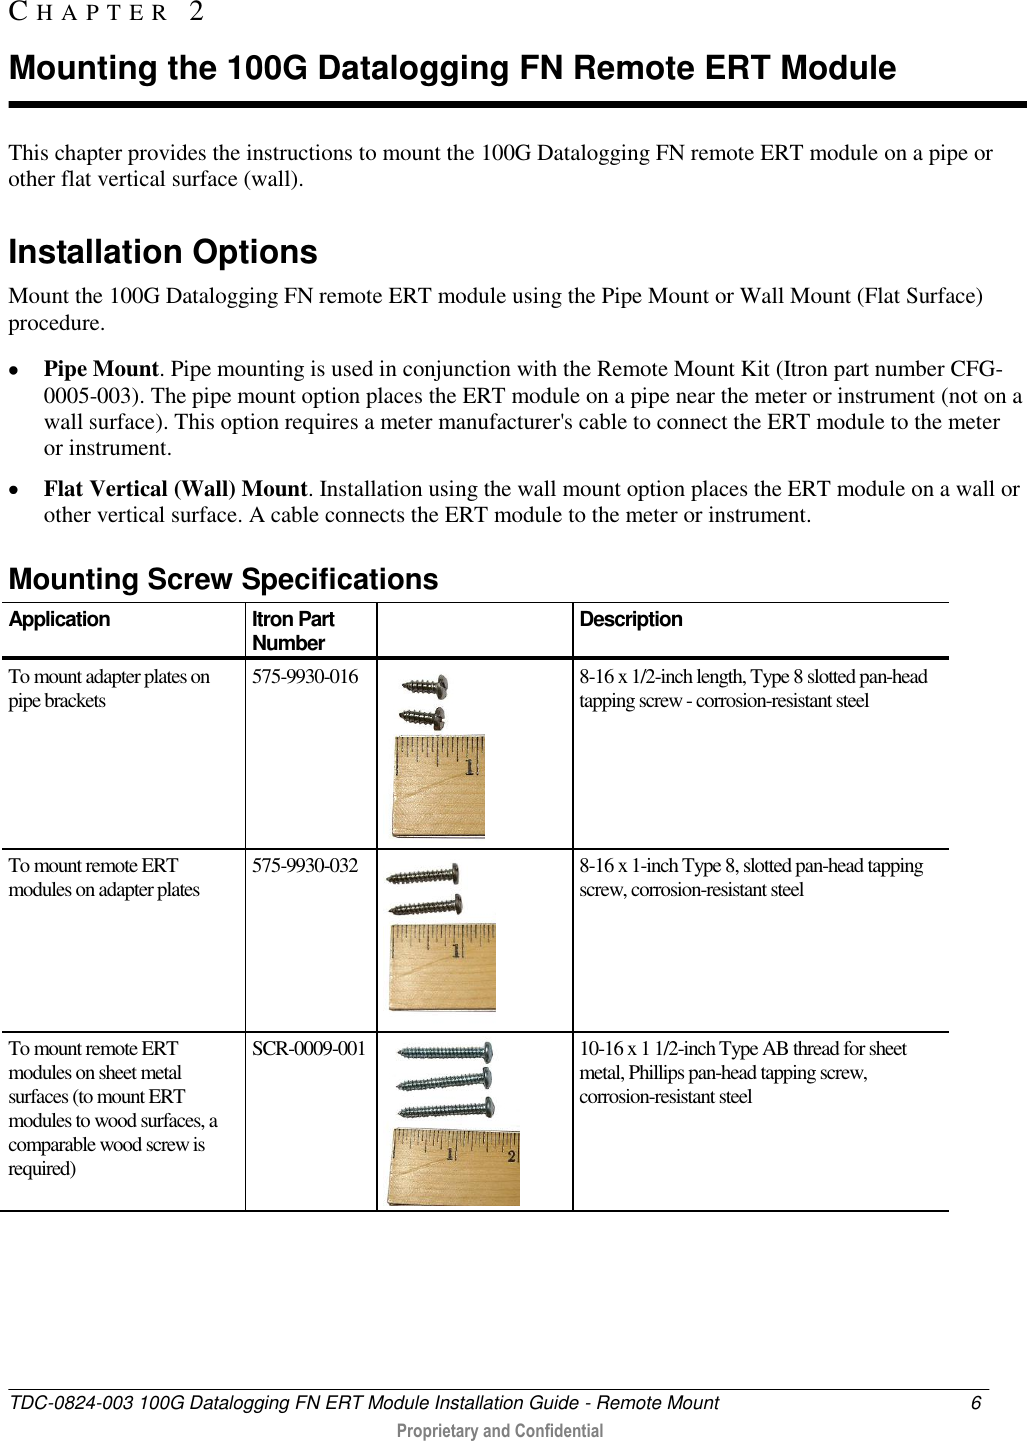  TDC-0824-003 100G Datalogging FN ERT Module Installation Guide - Remote Mount  6   Proprietary and Confidential     This chapter provides the instructions to mount the 100G Datalogging FN remote ERT module on a pipe or other flat vertical surface (wall).   Installation Options Mount the 100G Datalogging FN remote ERT module using the Pipe Mount or Wall Mount (Flat Surface) procedure.  Pipe Mount. Pipe mounting is used in conjunction with the Remote Mount Kit (Itron part number CFG-0005-003). The pipe mount option places the ERT module on a pipe near the meter or instrument (not on a wall surface). This option requires a meter manufacturer&apos;s cable to connect the ERT module to the meter or instrument.  Flat Vertical (Wall) Mount. Installation using the wall mount option places the ERT module on a wall or other vertical surface. A cable connects the ERT module to the meter or instrument.   Mounting Screw Specifications Application Itron Part Number  Description To mount adapter plates on pipe brackets 575-9930-016  8-16 x 1/2-inch length, Type 8 slotted pan-head tapping screw - corrosion-resistant steel To mount remote ERT modules on adapter plates 575-9930-032  8-16 x 1-inch Type 8, slotted pan-head tapping screw, corrosion-resistant steel To mount remote ERT modules on sheet metal surfaces (to mount ERT modules to wood surfaces, a comparable wood screw is required) SCR-0009-001  10-16 x 1 1/2-inch Type AB thread for sheet metal, Phillips pan-head tapping screw, corrosion-resistant steel   CH A P T E R   2  Mounting the 100G Datalogging FN Remote ERT Module 